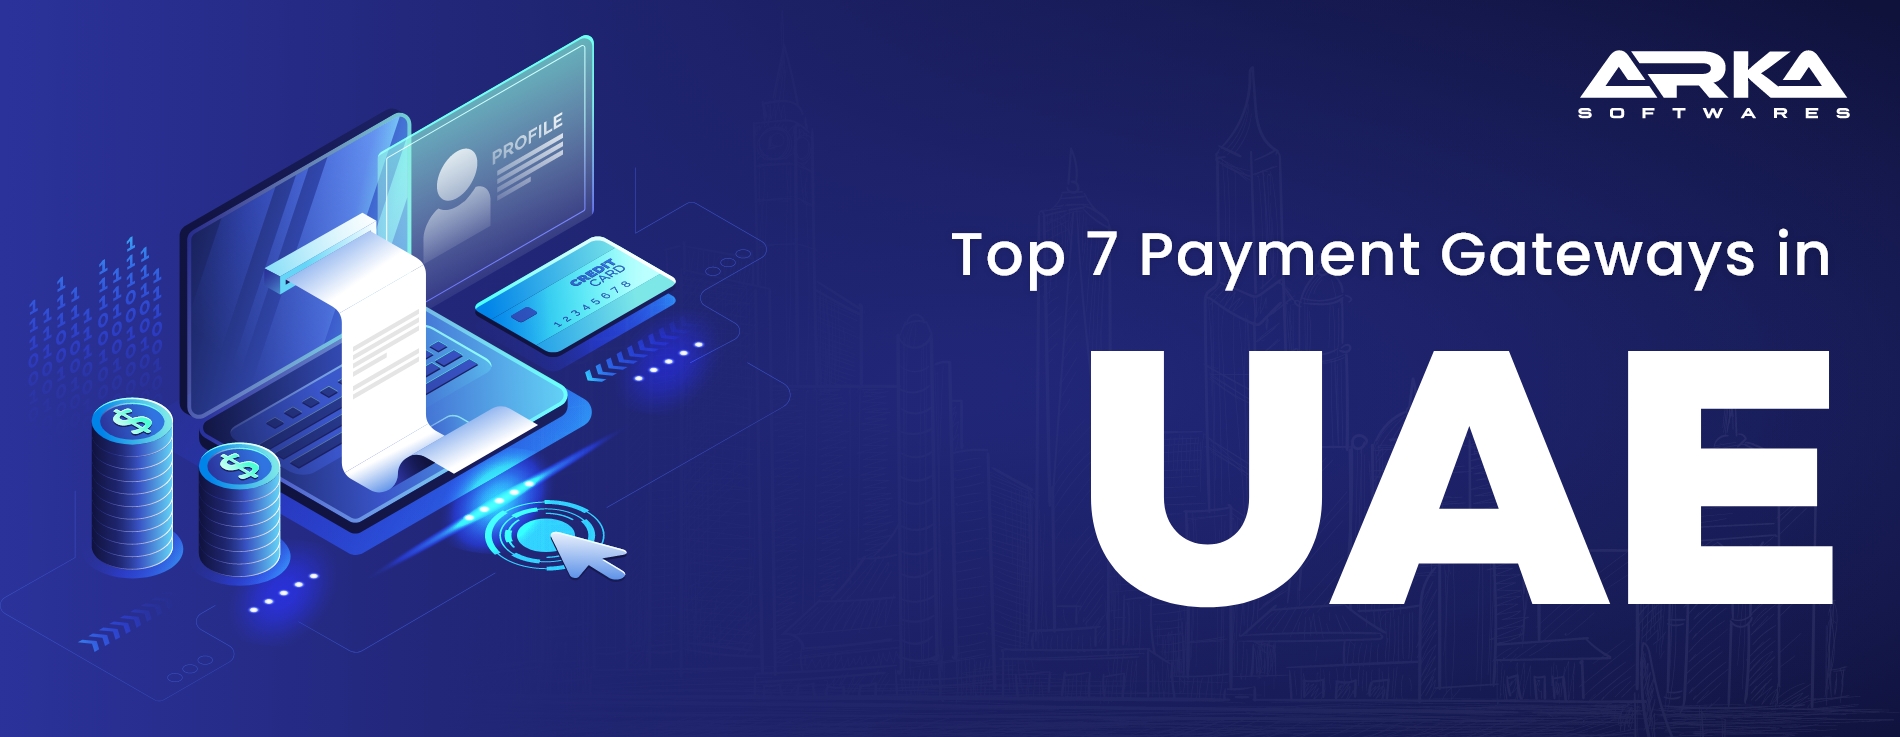 Top payment gateway in UAE for business